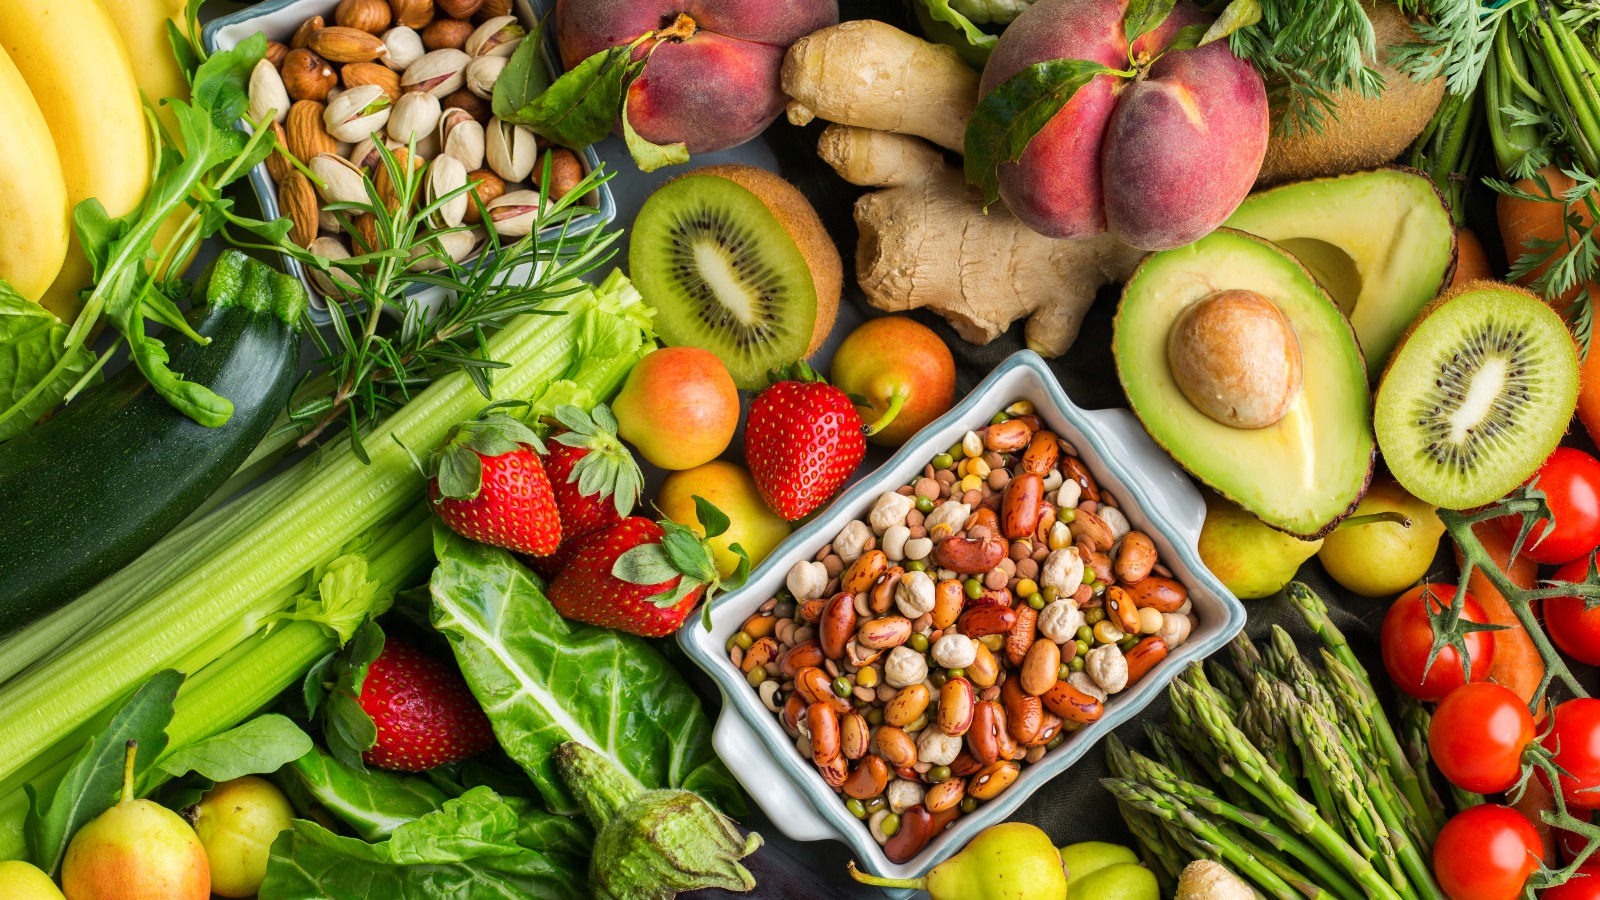 Overhead view table scene on a wooden background. Super food concept with green vegetables, berries, whole grains, seeds, spices and nutritious items.